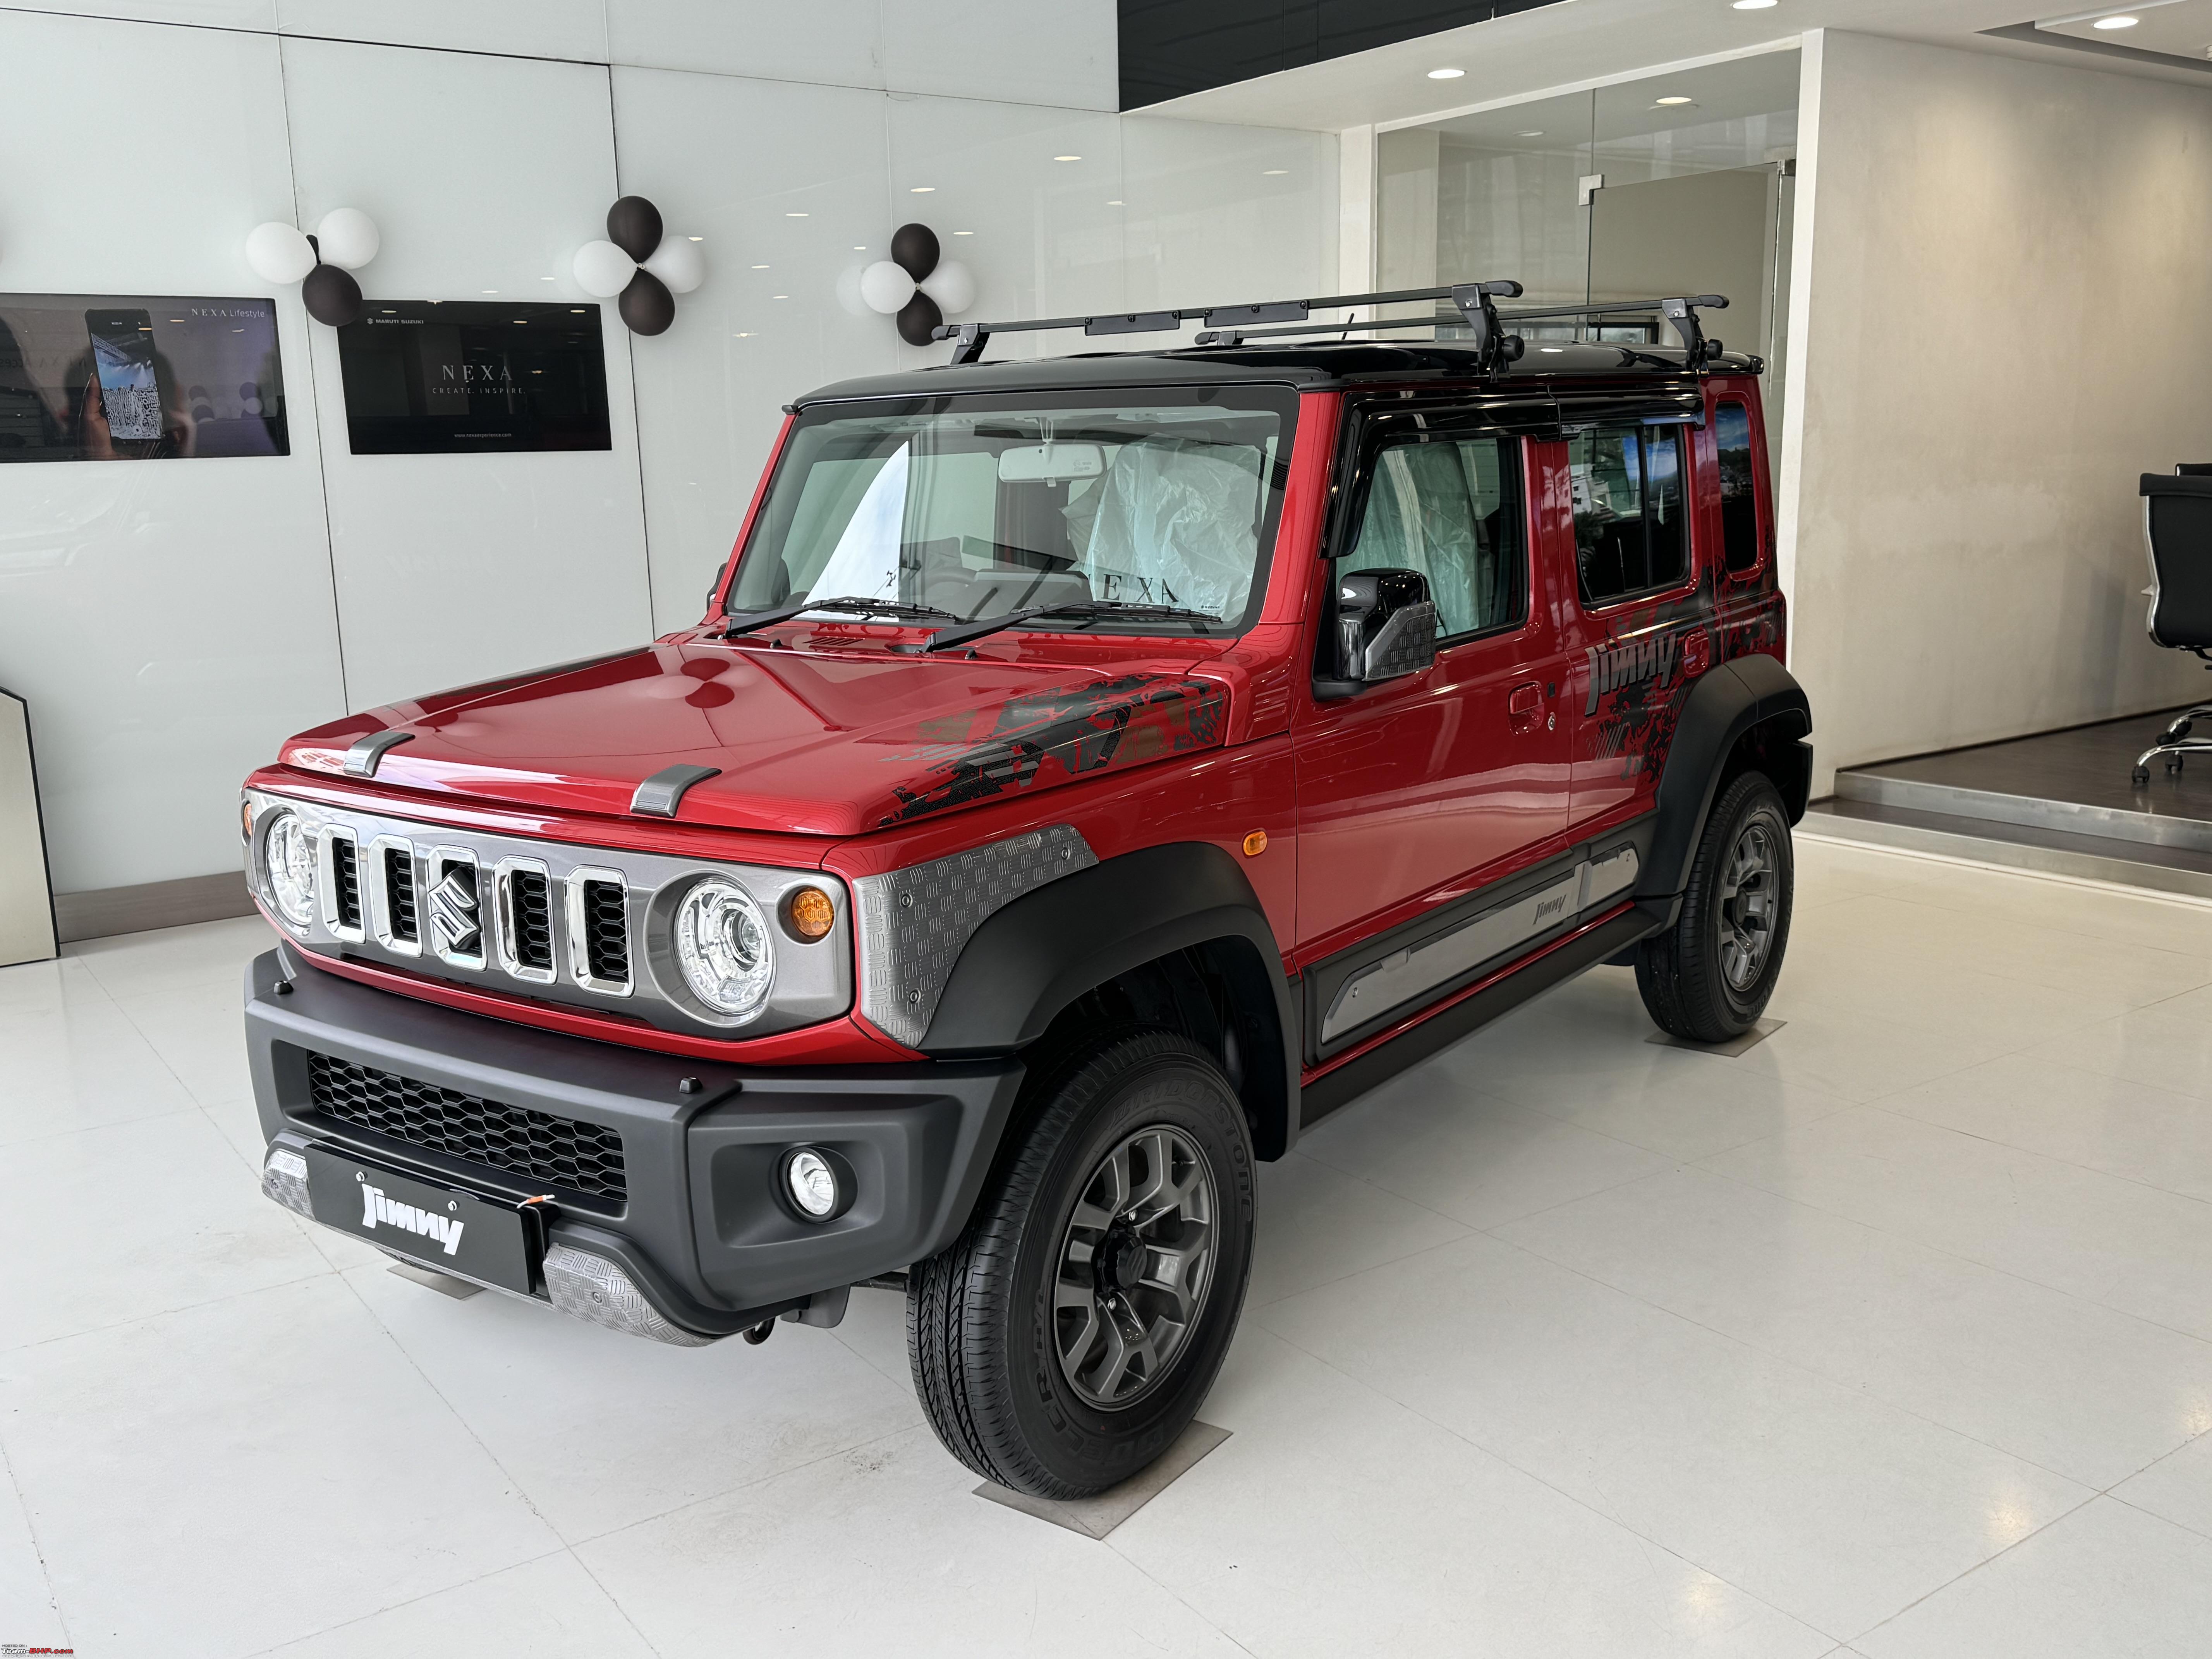 Maruti Jimny Thunder Edition launched at Rs 10.74 lakh  Jimny is 2-lakh  rupees cheaper now - Page 2 - Team-BHP